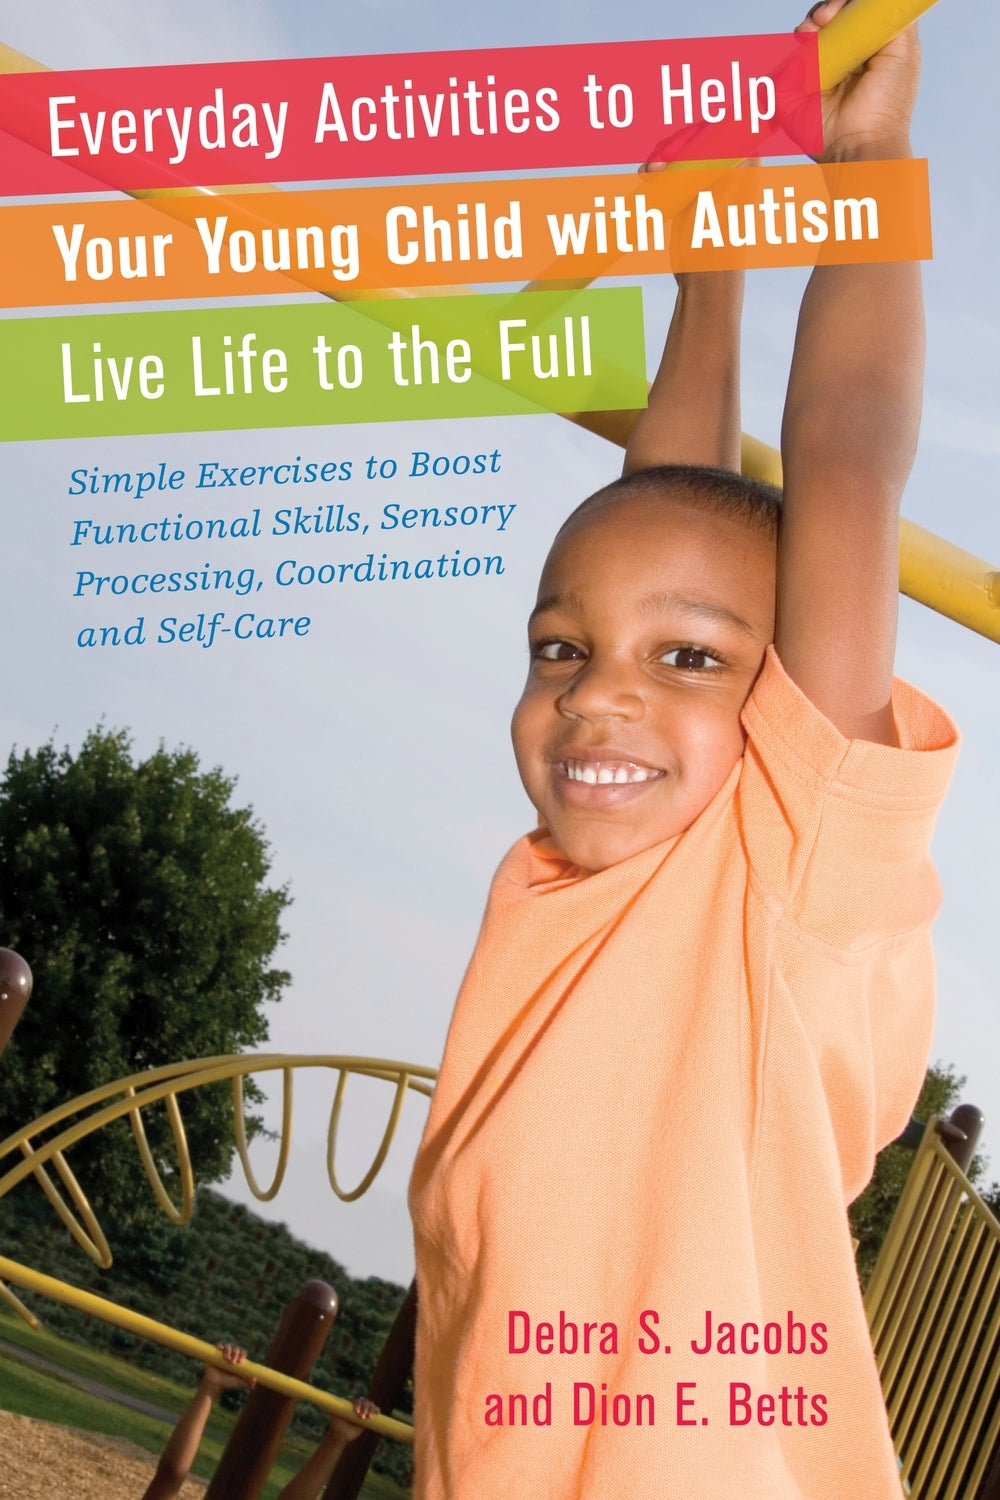 Everyday Activities to Help Your Young Child with Autism Live Life to the Full by Dion Betts, Debra Jacobs